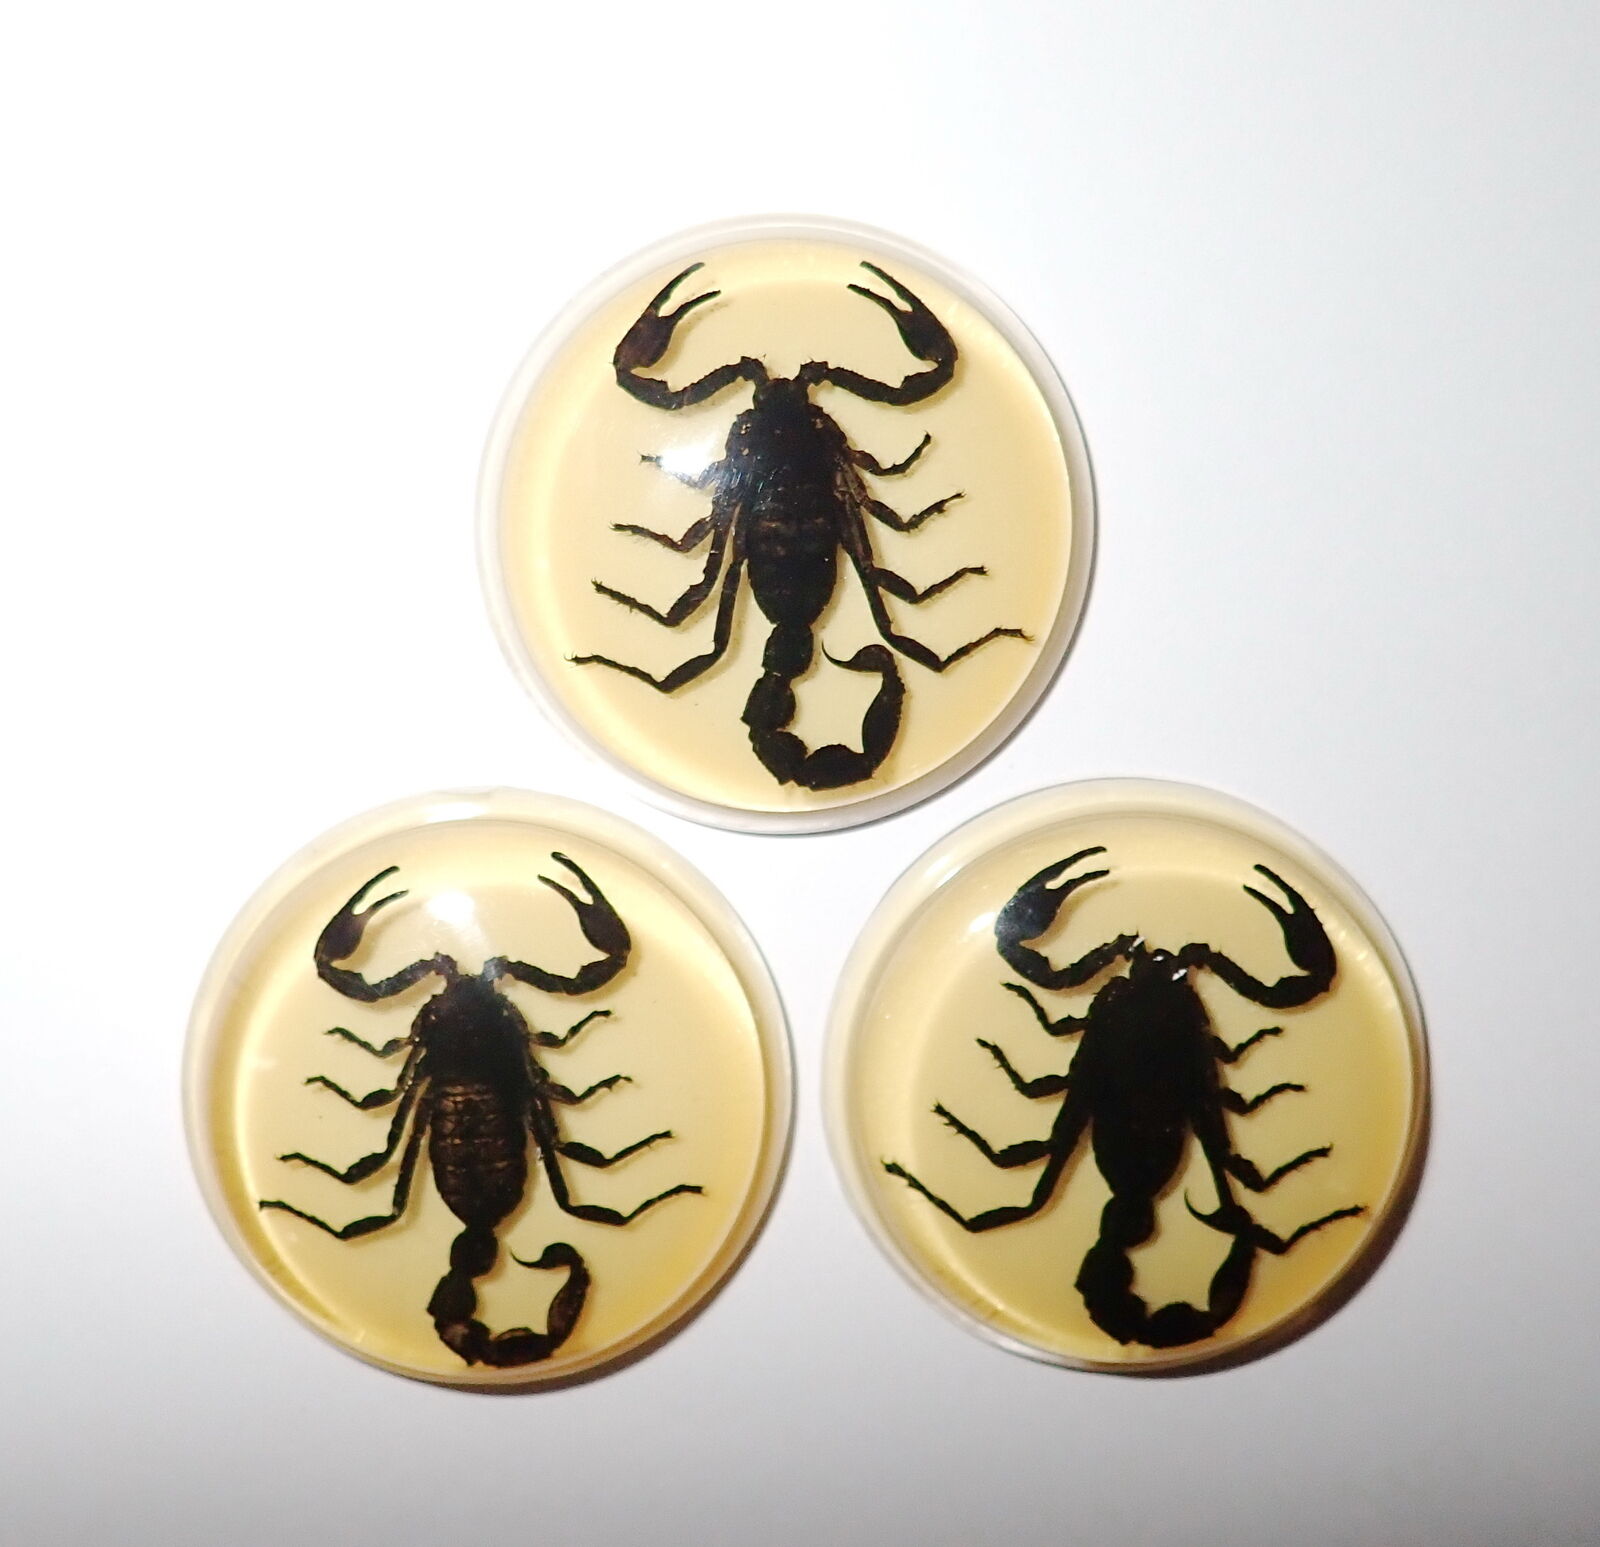 Insect Cabochon Black Scorpion 38.5 mm Round inner 35 mm Amber White 3 pcs Lot